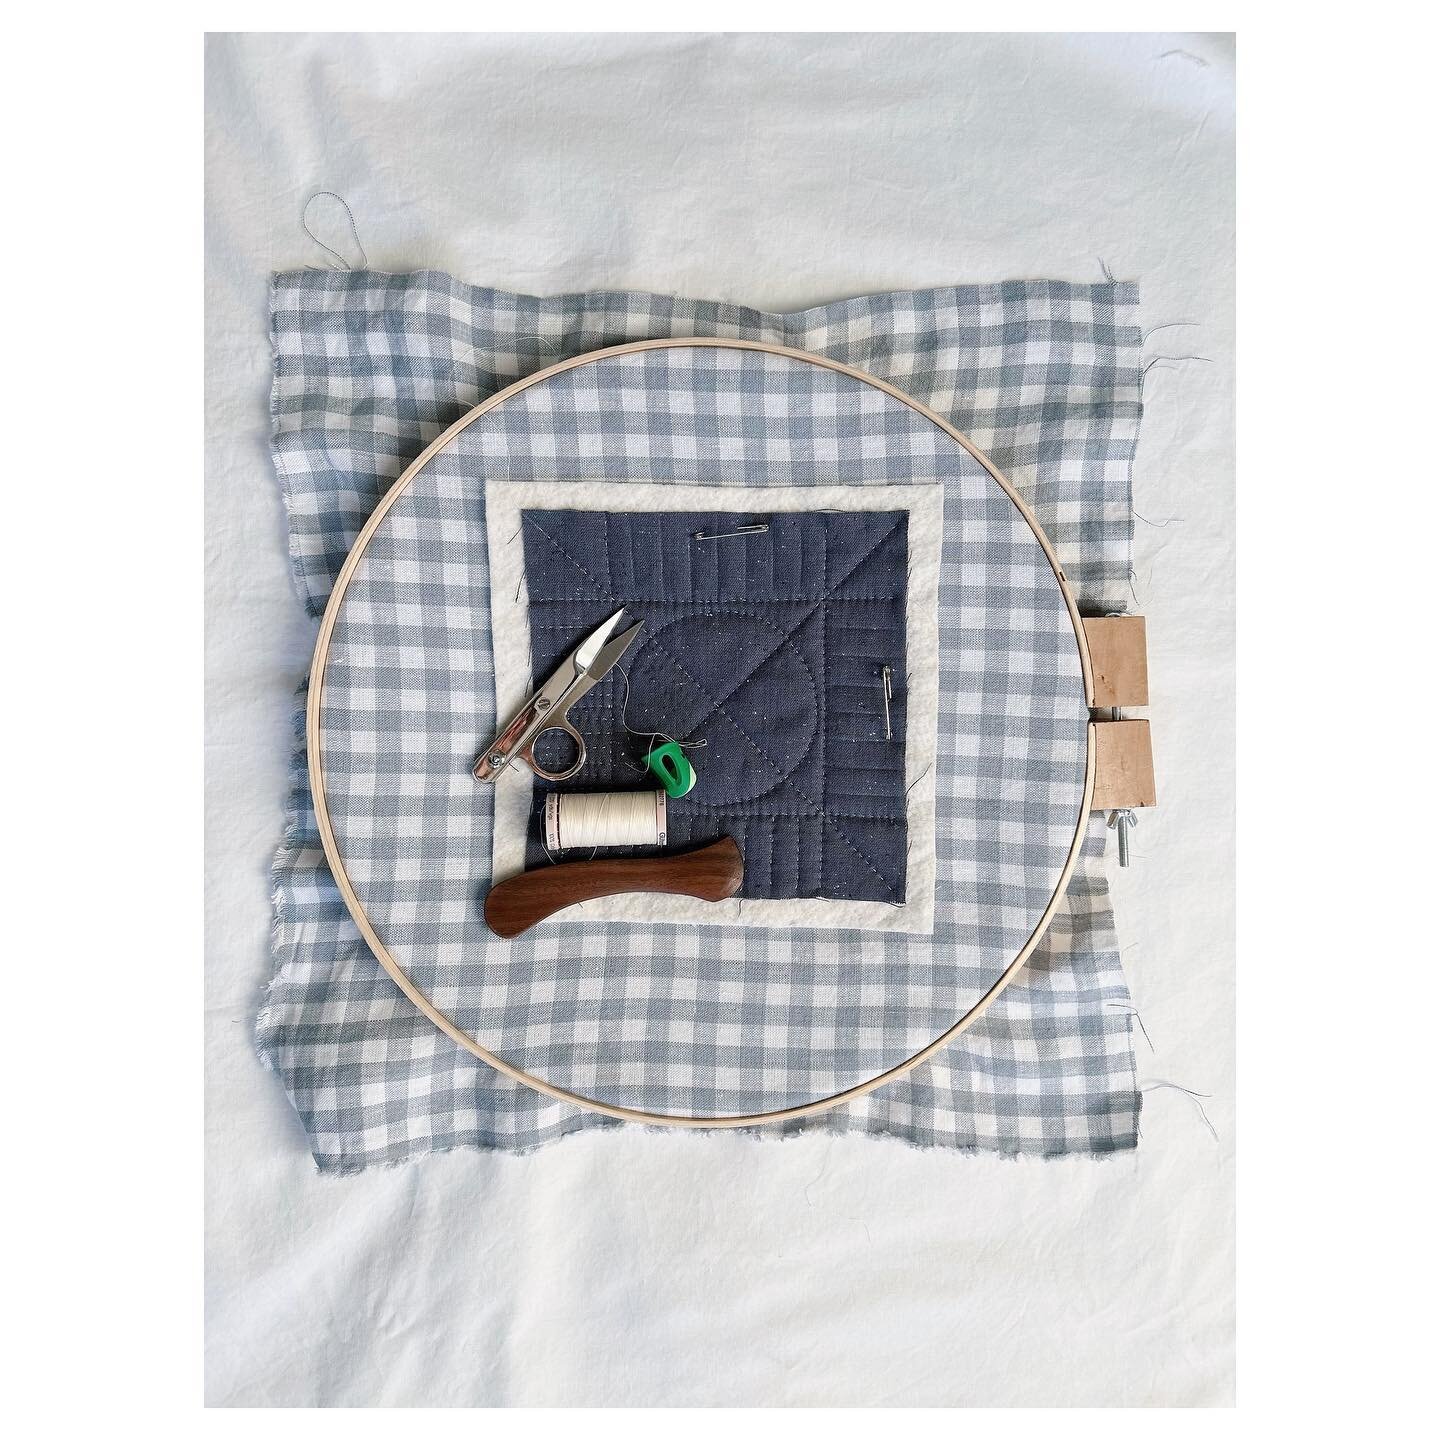 Attn: Portland area folks!! I&rsquo;m excited to announce that I will be teaching a hand quilting workshop at @makerspacesellwood June 9th. Head over to their website to sign up if you&rsquo;d like to learn in in&rsquo;s and outs of this traditional 